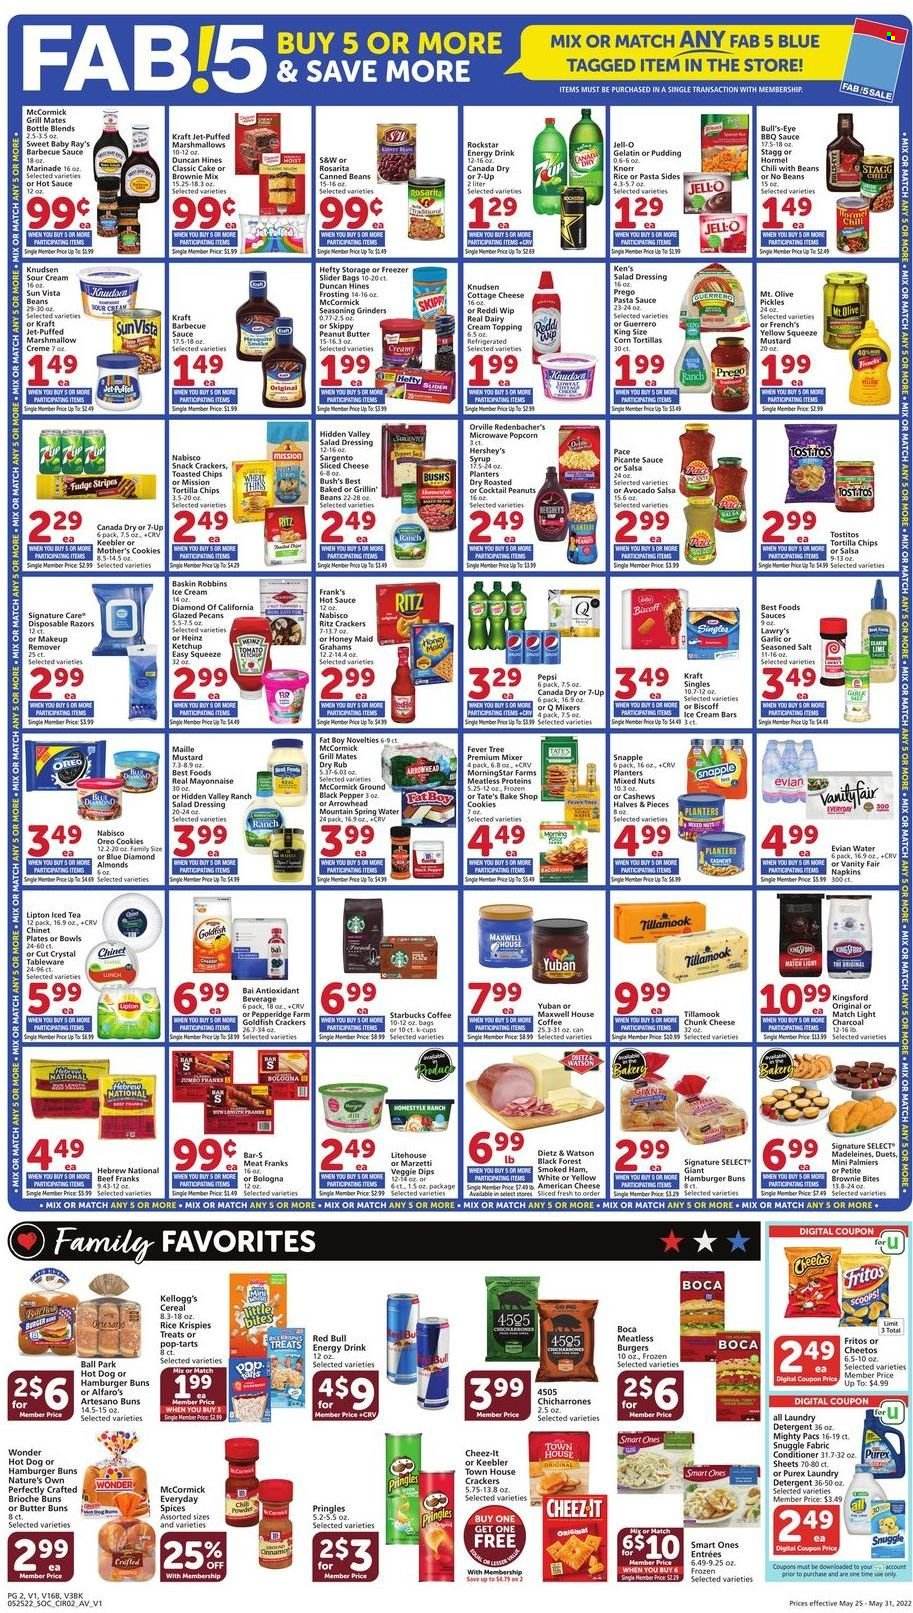 thumbnail - Vons Flyer - 05/25/2022 - 05/31/2022 - Sales products - corn tortillas, cake, buns, burger buns, brioche, brownies, garlic, hot dog, pasta sauce, pasta sides, Kraft®, Hormel, ham, smoked ham, bologna sausage, Dietz & Watson, american cheese, cottage cheese, sandwich slices, sliced cheese, Kraft Singles, chunk cheese, Sargento, pudding, Oreo, sour cream, real dairy cream, mayonnaise, ice cream, ice cream bars, Hershey's, cookies, fudge, marshmallows, snack, crackers, Kellogg's, Pop-Tarts, Little Bites, Keebler, RITZ, Fritos, tortilla chips, Pringles, Cheetos, popcorn, Goldfish, Cheez-It, Tostitos, frosting, topping, Jell-O, Heinz, pickles, cereals, Honey Maid, rice, spice, BBQ sauce, mustard, salad dressing, hot sauce, ketchup, dressing, salsa, marinade, peanut butter, almonds, cashews, peanuts, pecans, mixed nuts, Planters, Blue Diamond, Canada Dry, Pepsi, energy drink, Lipton, ice tea, 7UP, Red Bull, Snapple, Bai, Rockstar, spring water, Evian, Maxwell House, coffee, Starbucks, coffee capsules, K-Cups, napkins, detergent, Snuggle, laundry detergent, Purex, Jet, disposable razor, tableware, plate, cup, Hefty, Nature's Own. Page 2.